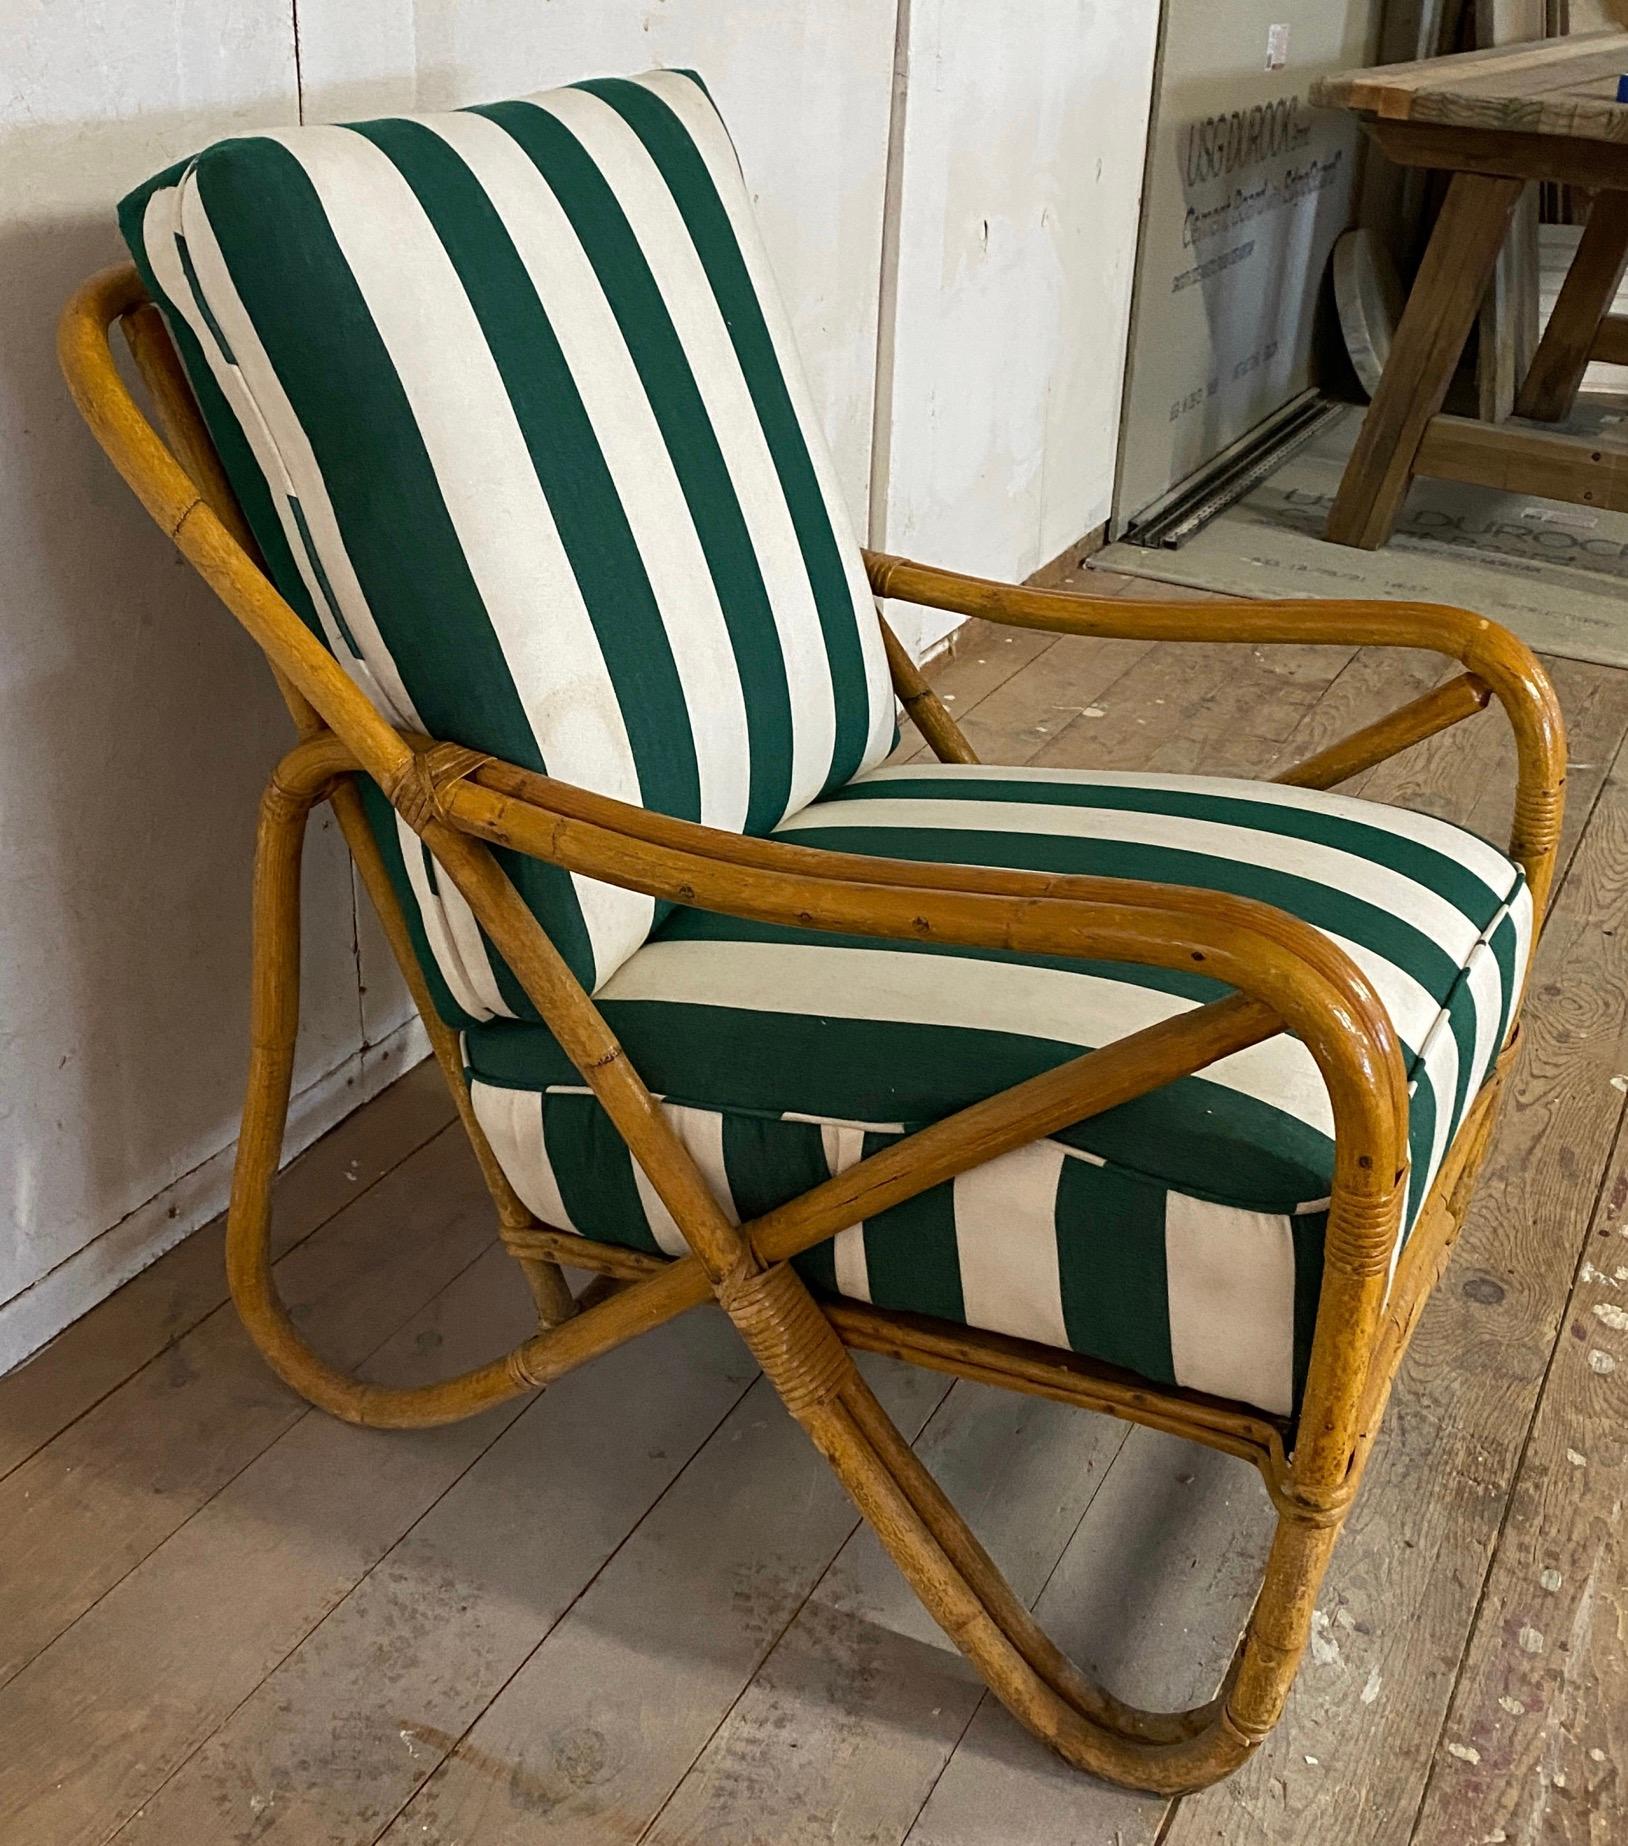 The 2 strand wicker/rattan club chair has rounded arm that comes with green and white wide striped canvas seat and back cushions. The side has pretzel shape x design.  This lounge chair offers style and comfort for any porch or patio.
The seat